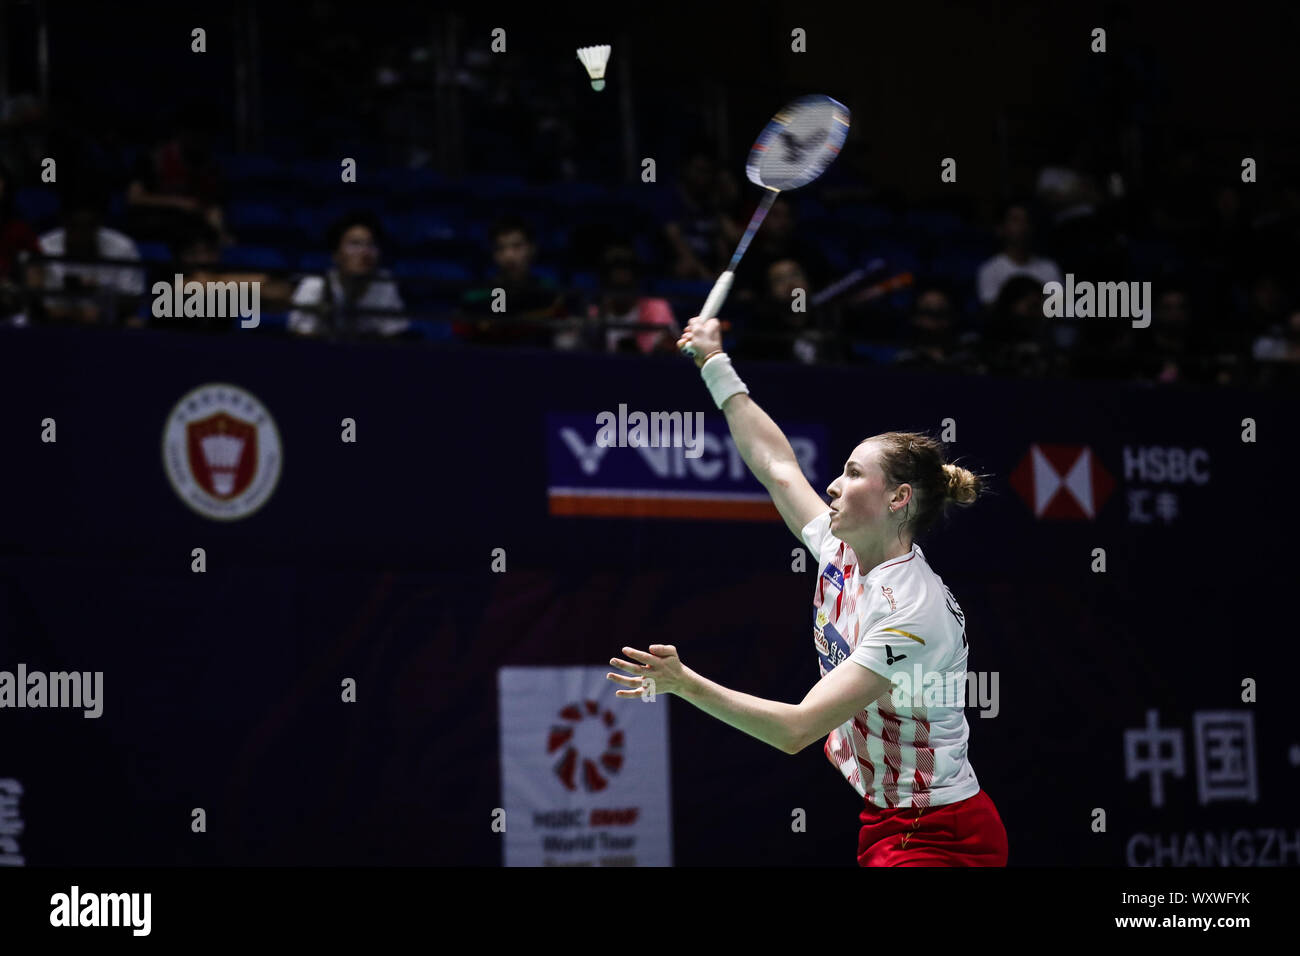 Danish professional badminton player Line Kjarsfeldt competes against Thai  professional badminton player Ratchanok Intanon at the first round of  women's single of VICTOR China Open 2019, in Changzhou city, east China's  Jiangsu